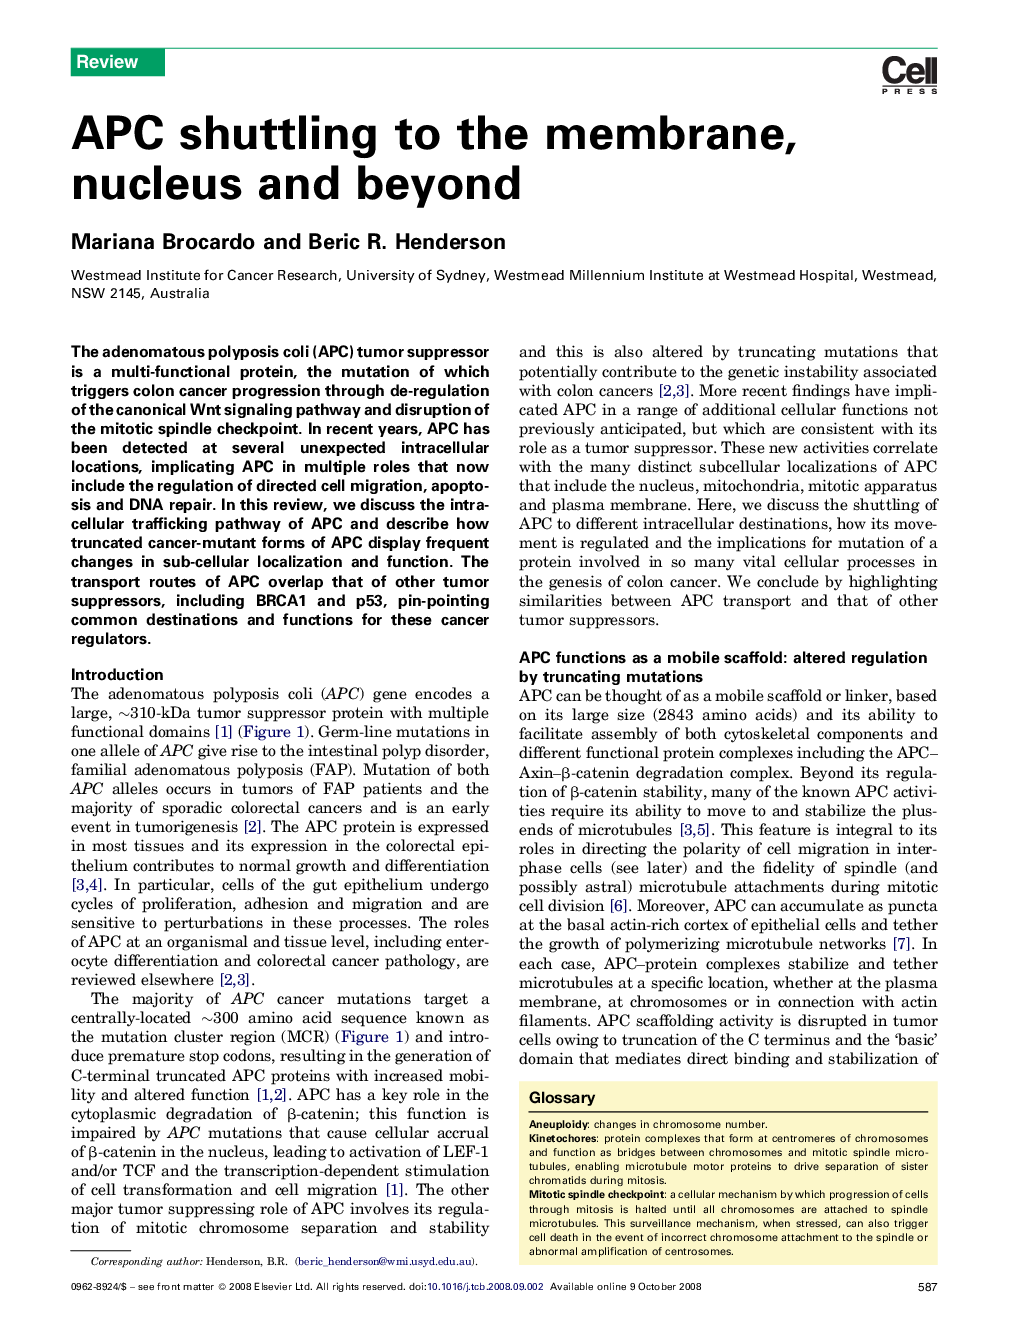 APC shuttling to the membrane, nucleus and beyond